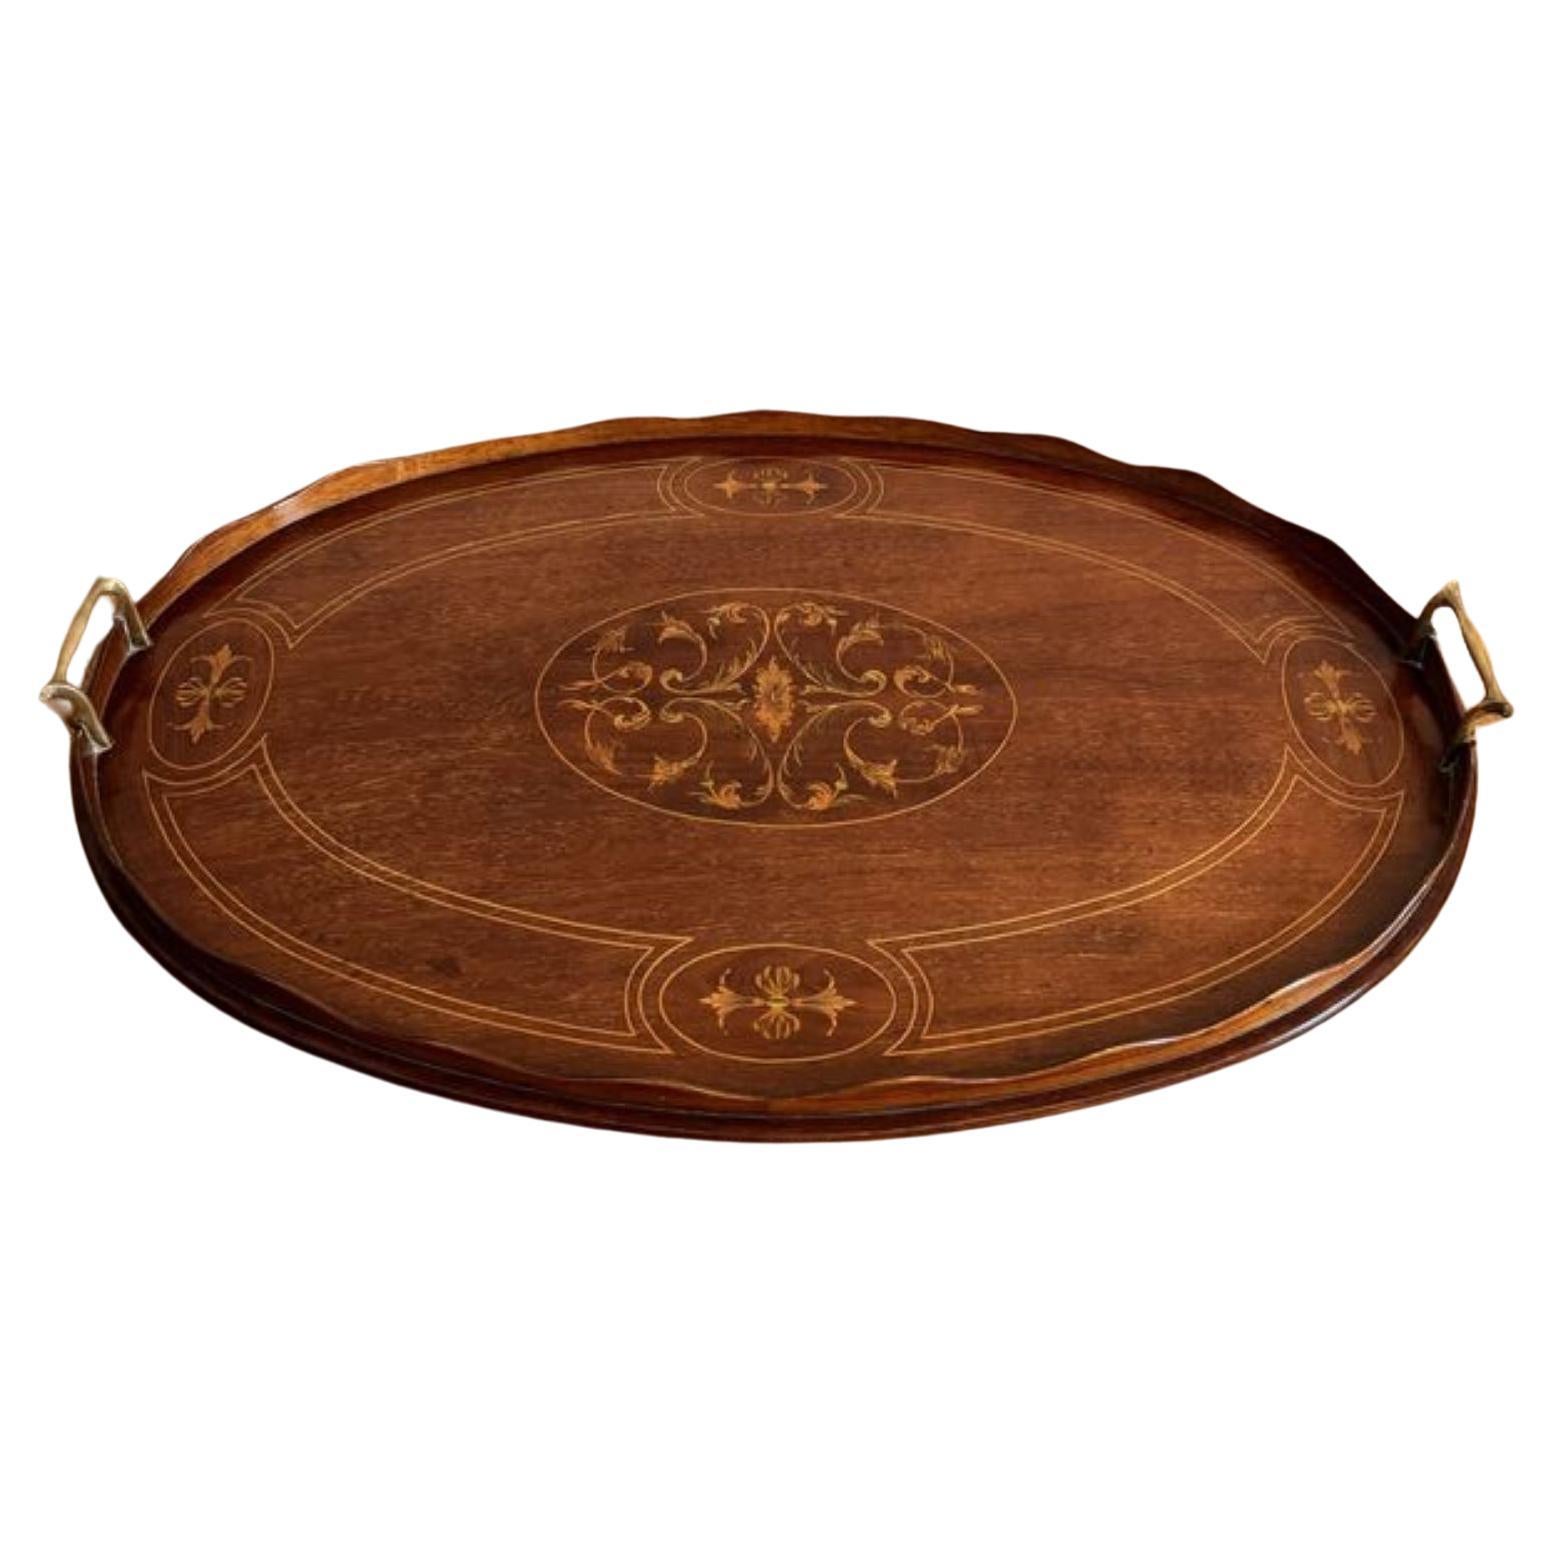 Quality antique Edwardian mahogany inlaid oval tea tray For Sale